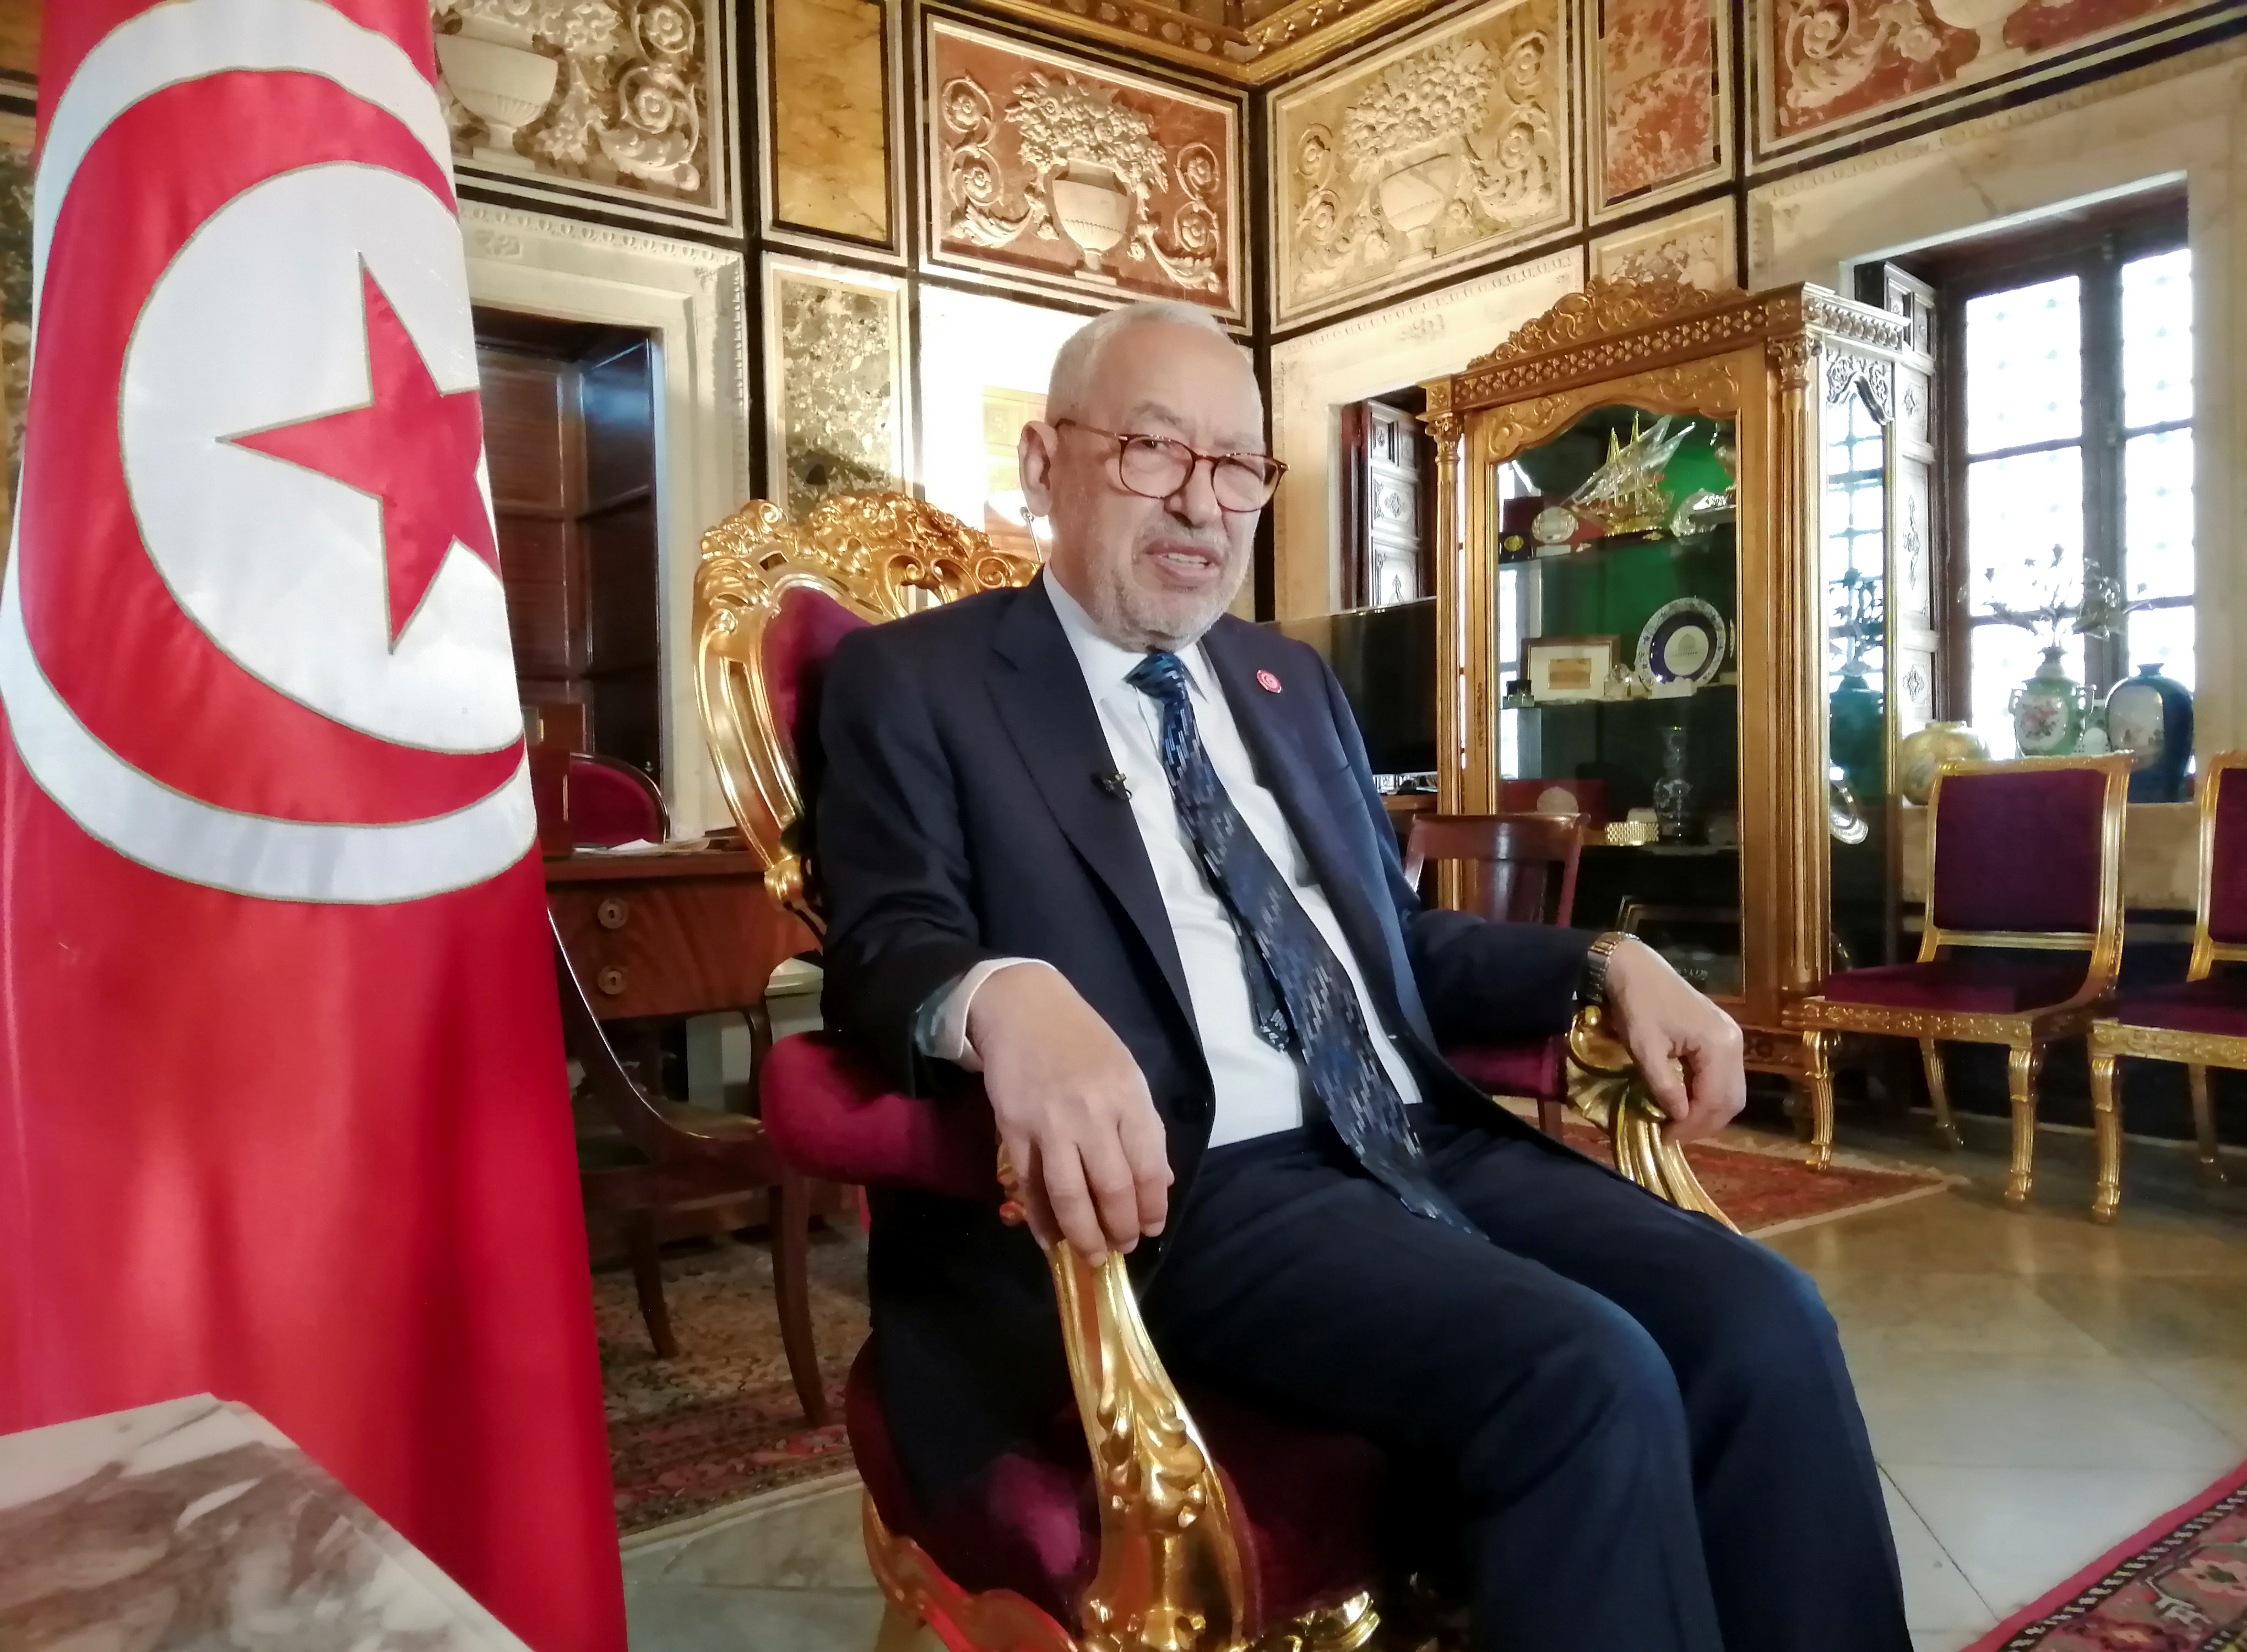 Parliament Speaker Rached Ghannouchi speaks during an interview with Reuters in his office, in Tunis